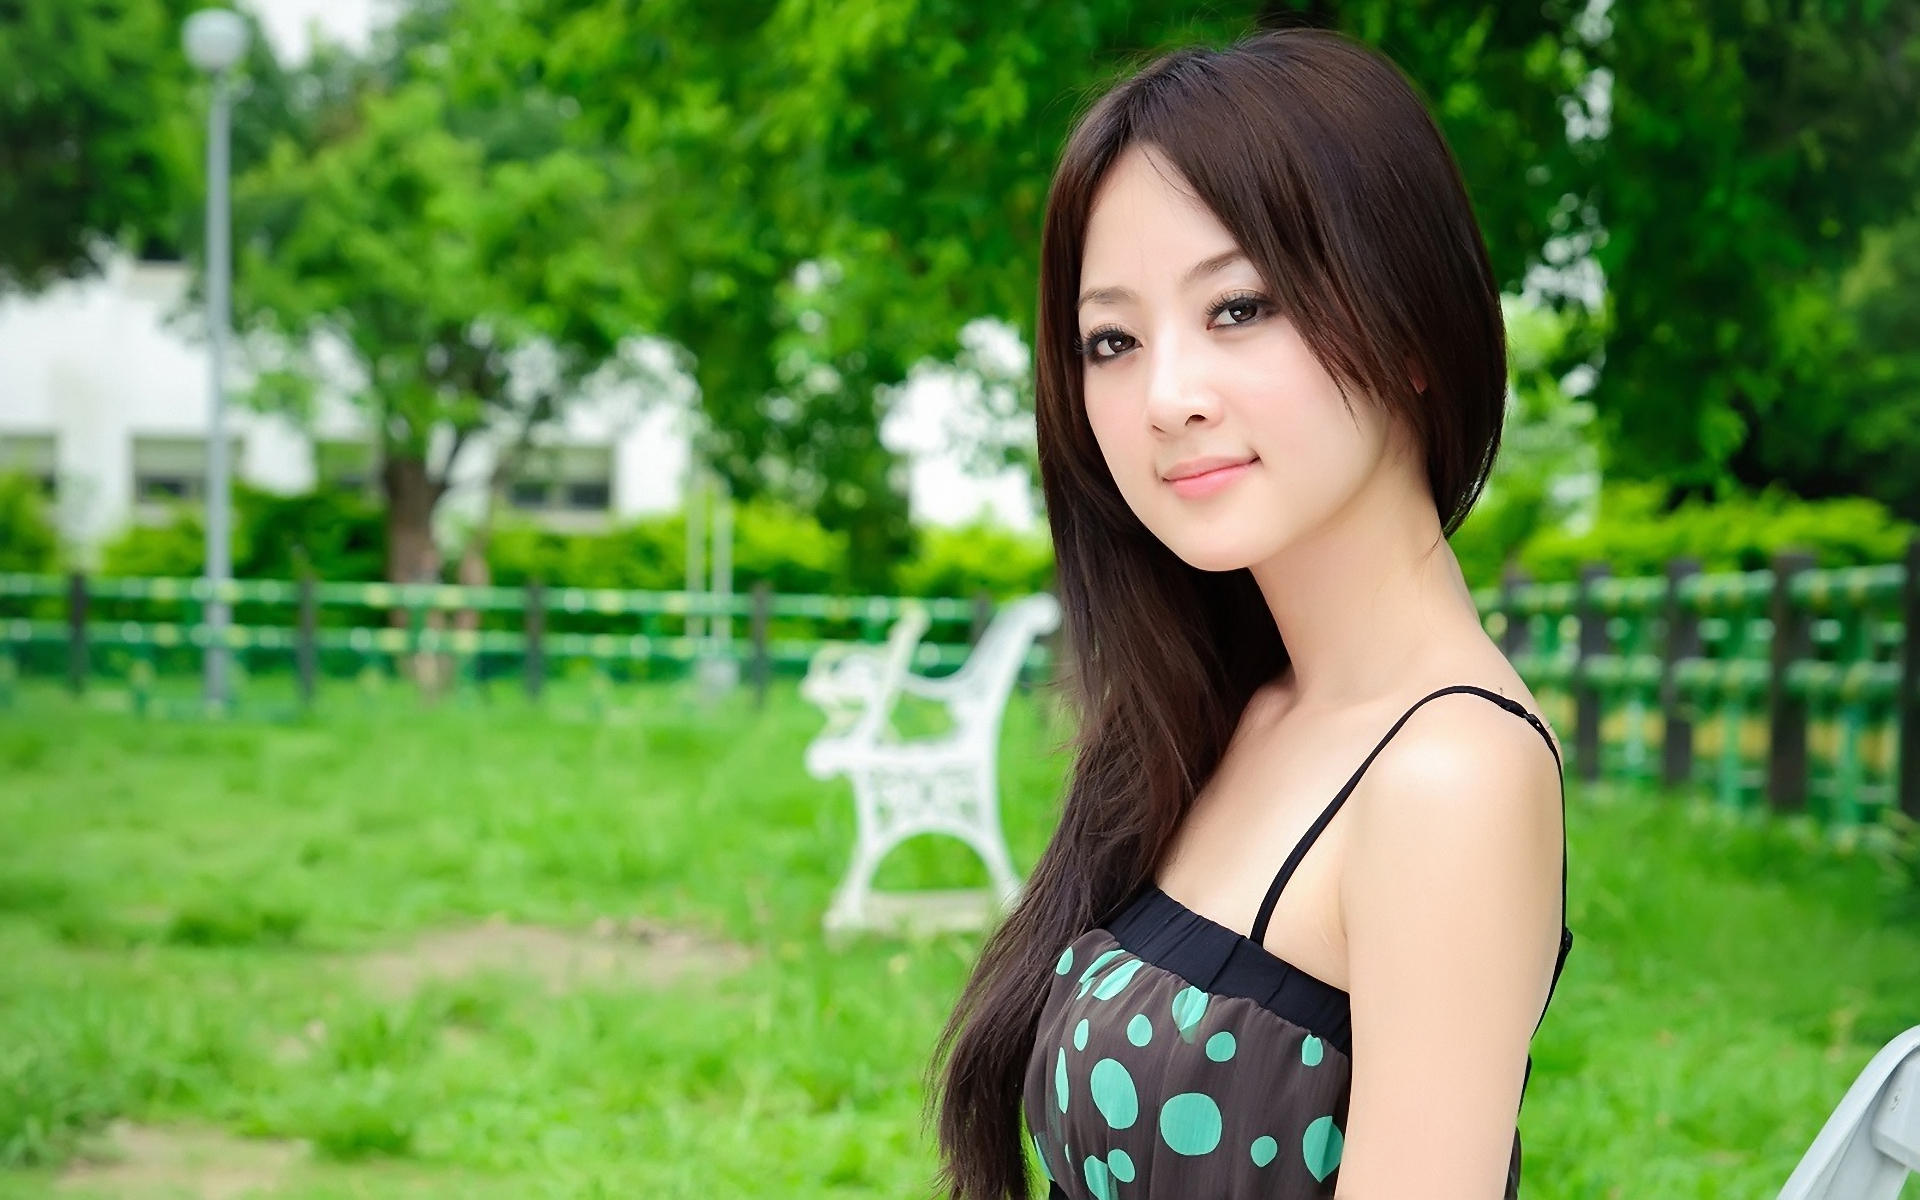 Free Download Cute Japanese Girls Wallpapers Playboy Playmates My 19x10 For Your Desktop Mobile Tablet Explore 73 Cute Japanese Wallpapers Cute Teen Wallpaper Cute Photos For Wallpaper Cute Girl